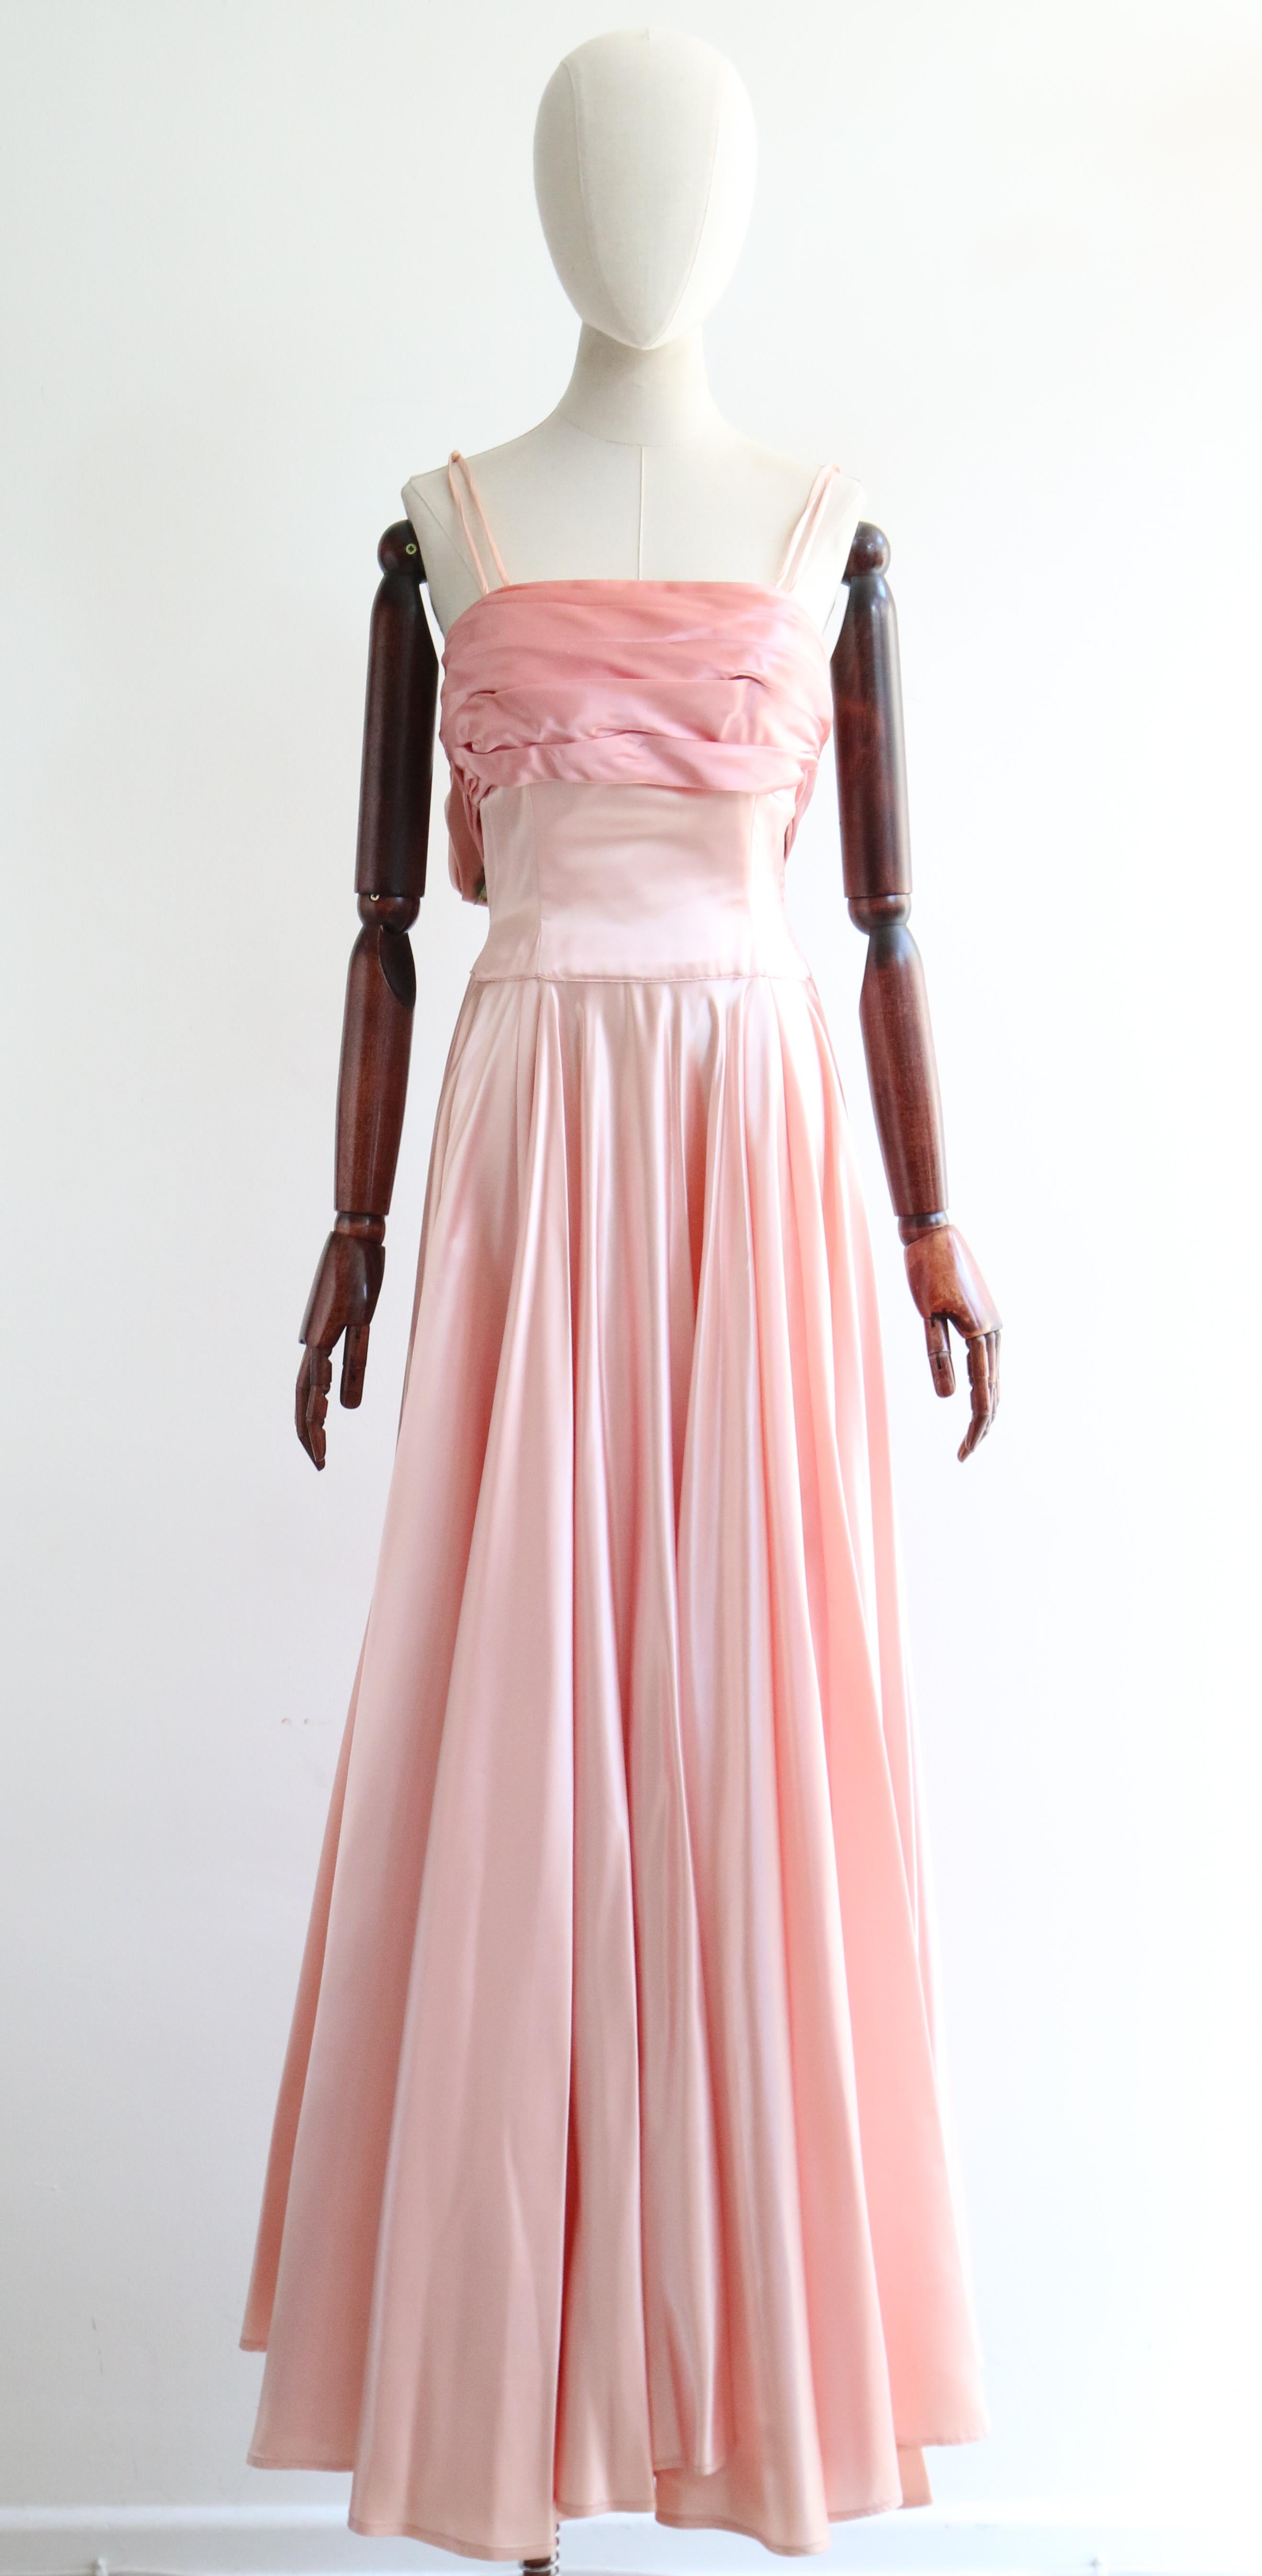 This breathtaking 1950's duchess satin gown, in the most eye-catching shade of petal pink and blush pink, is the perfect piece for that special occasion.  

The straight cut of the neckline is framed by thin double shoulder straps that twist